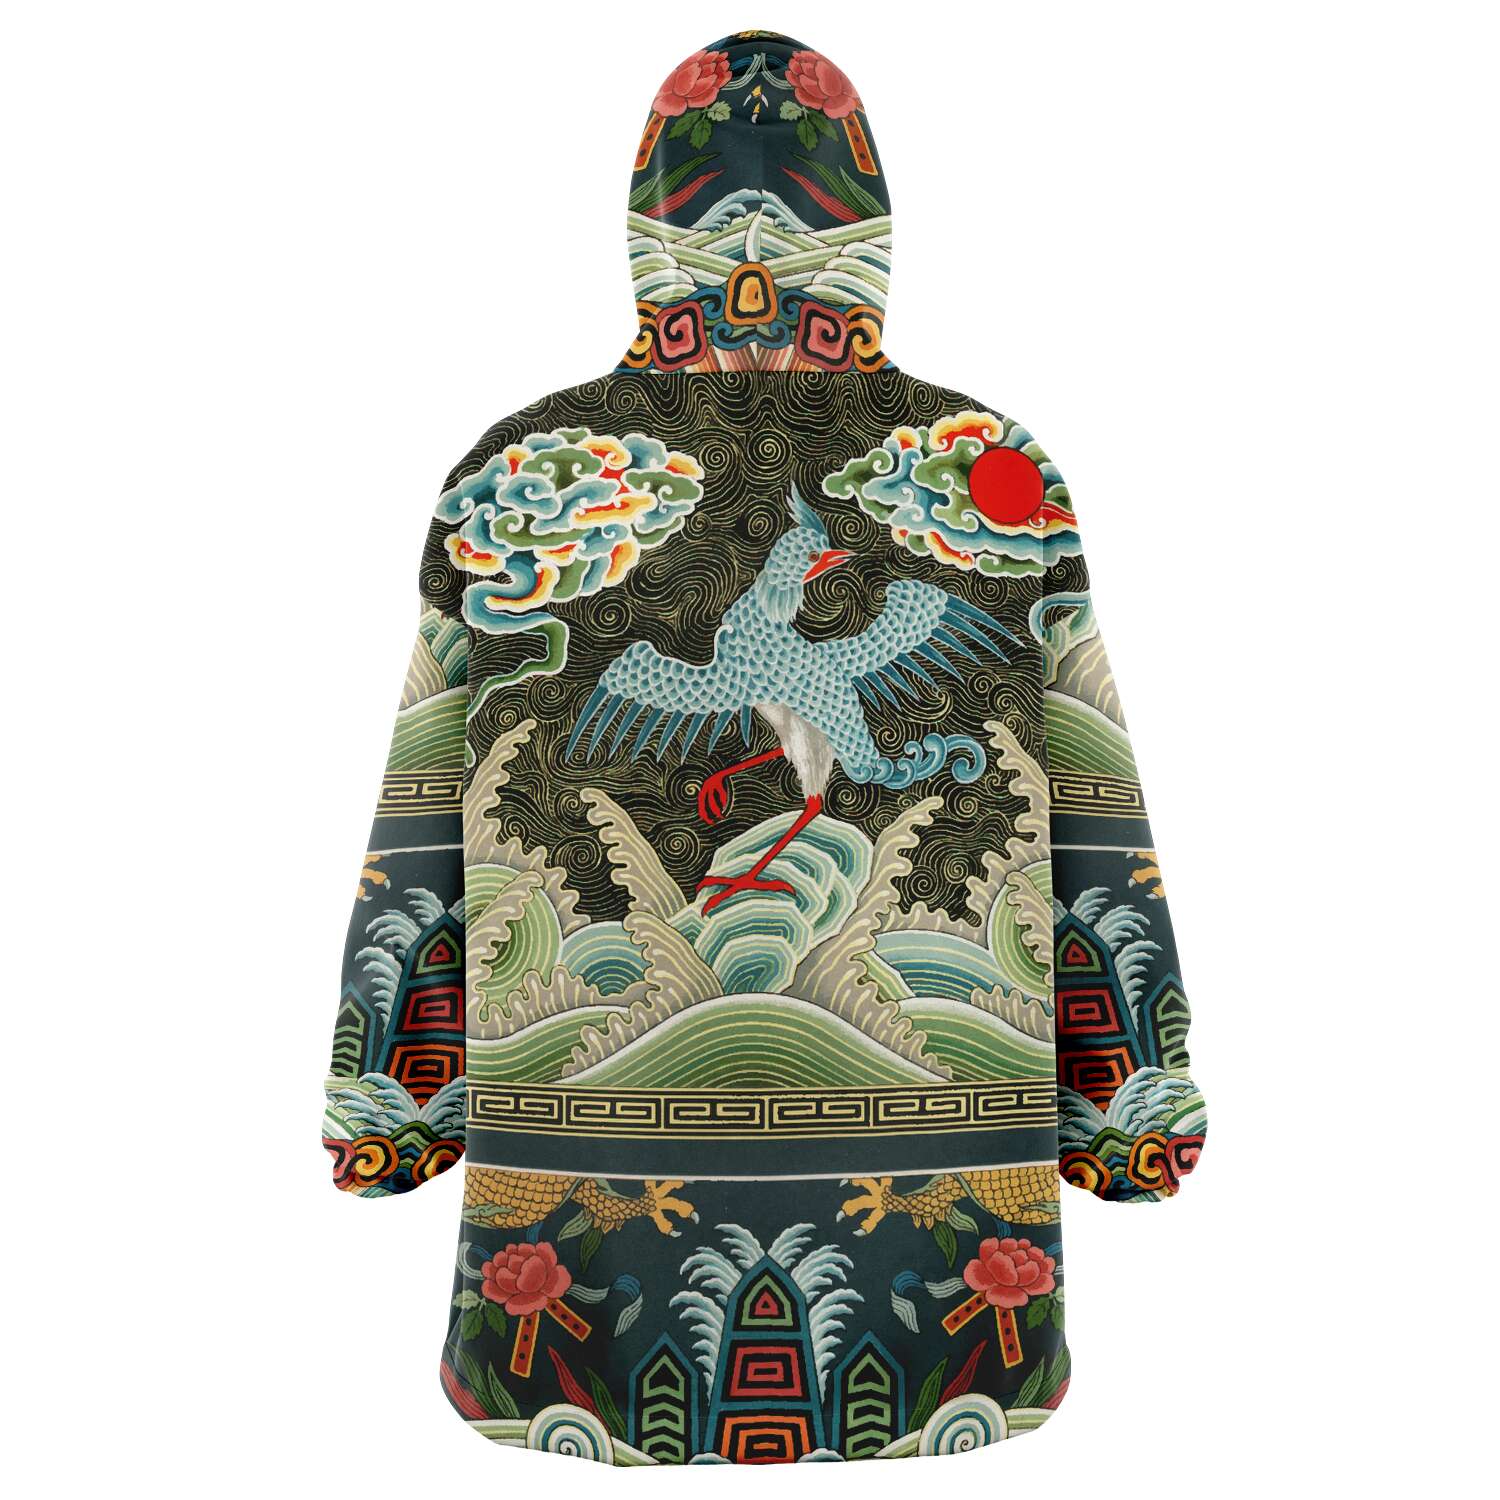 Male or Female Asian Crane Art Nouveau Giant Oversized Hoodie with Pockets